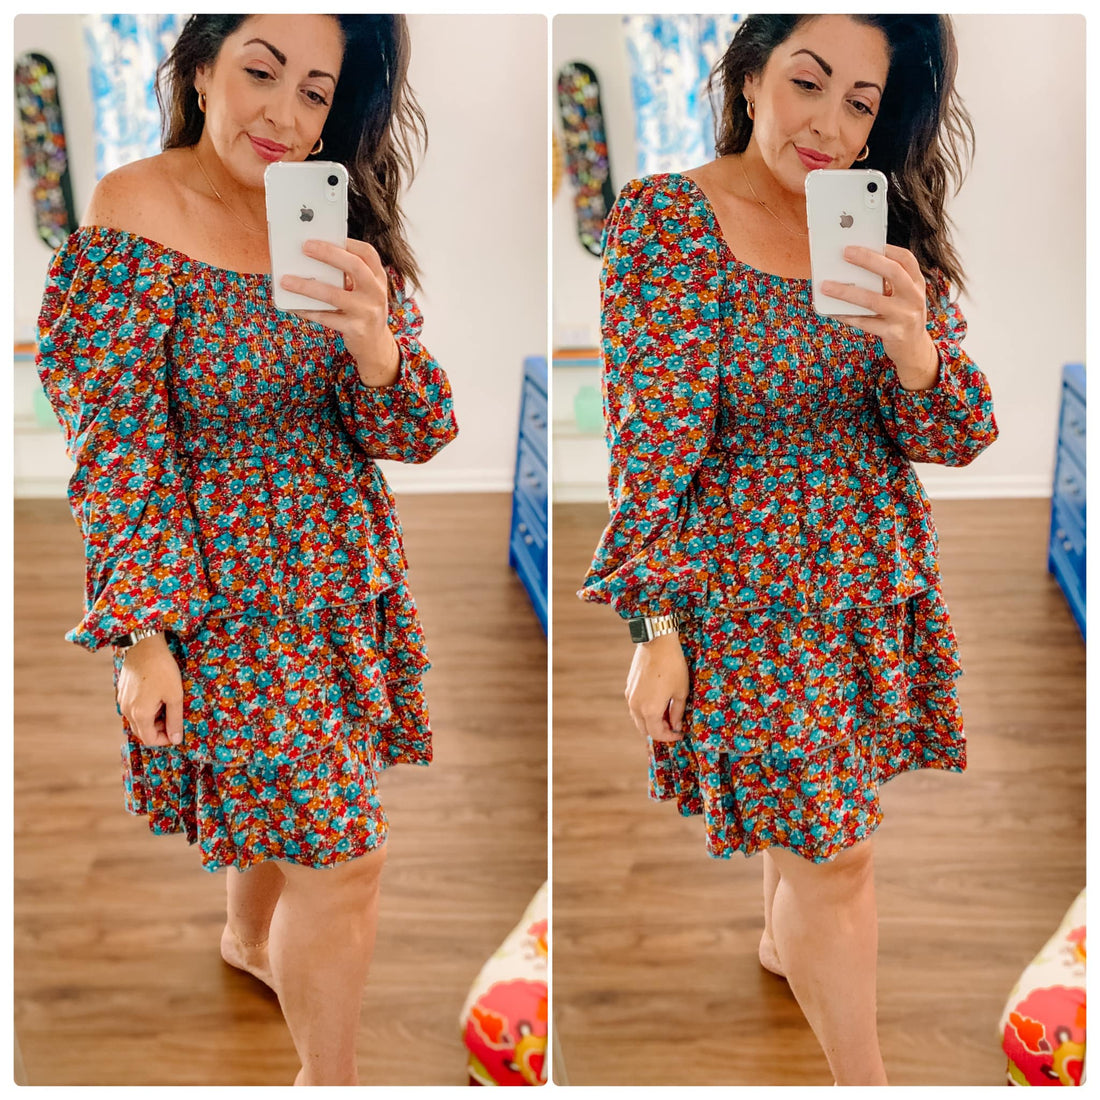 Fall Dresses from Amazon